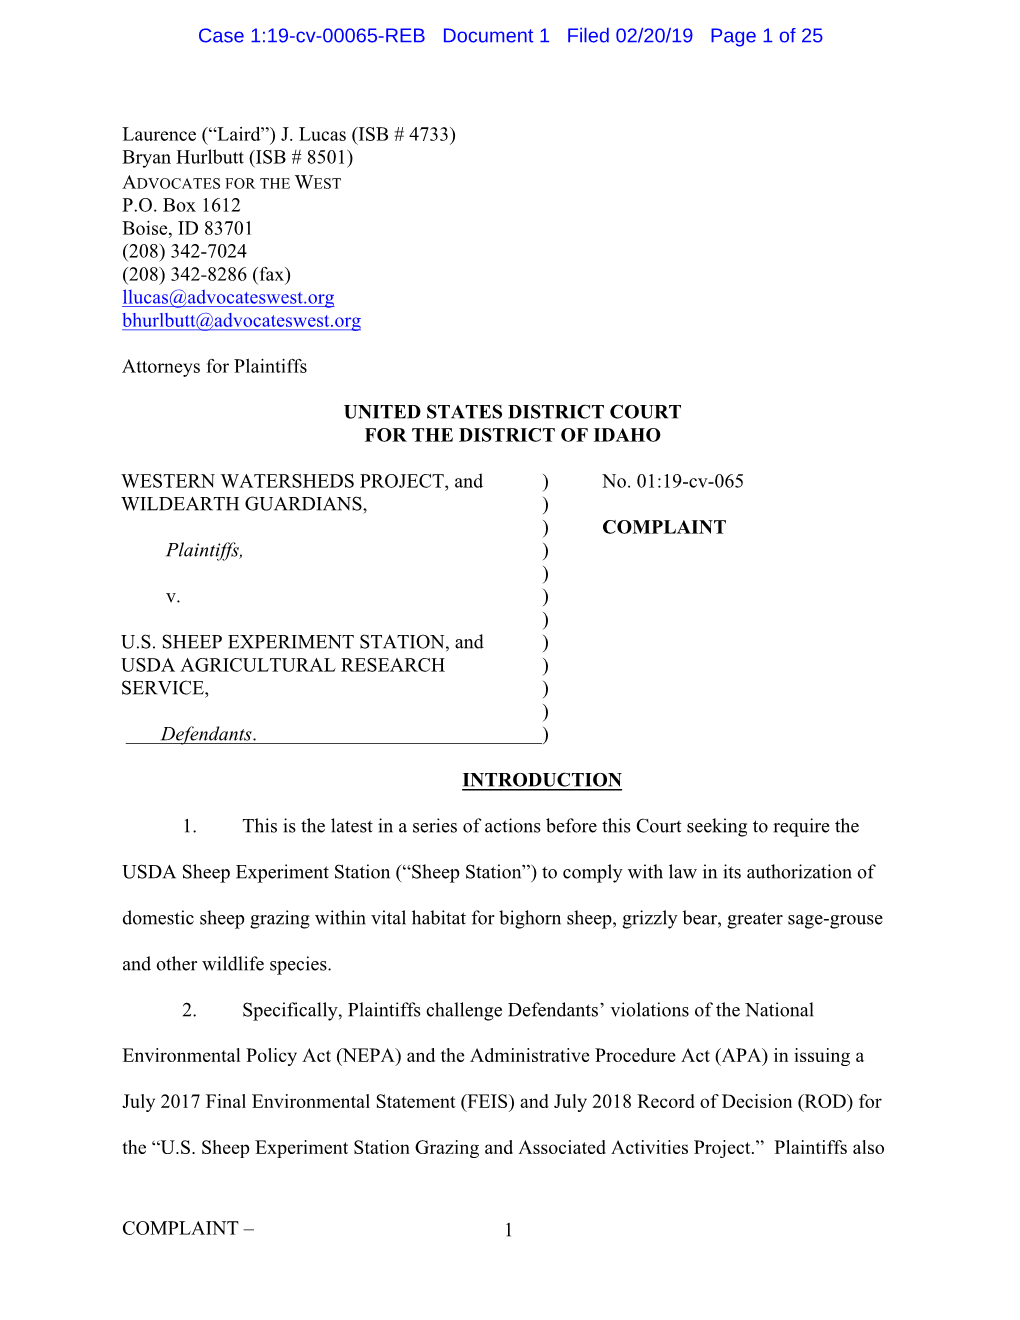 Case 1:19-Cv-00065-REB Document 1 Filed 02/20/19 Page 1 of 25